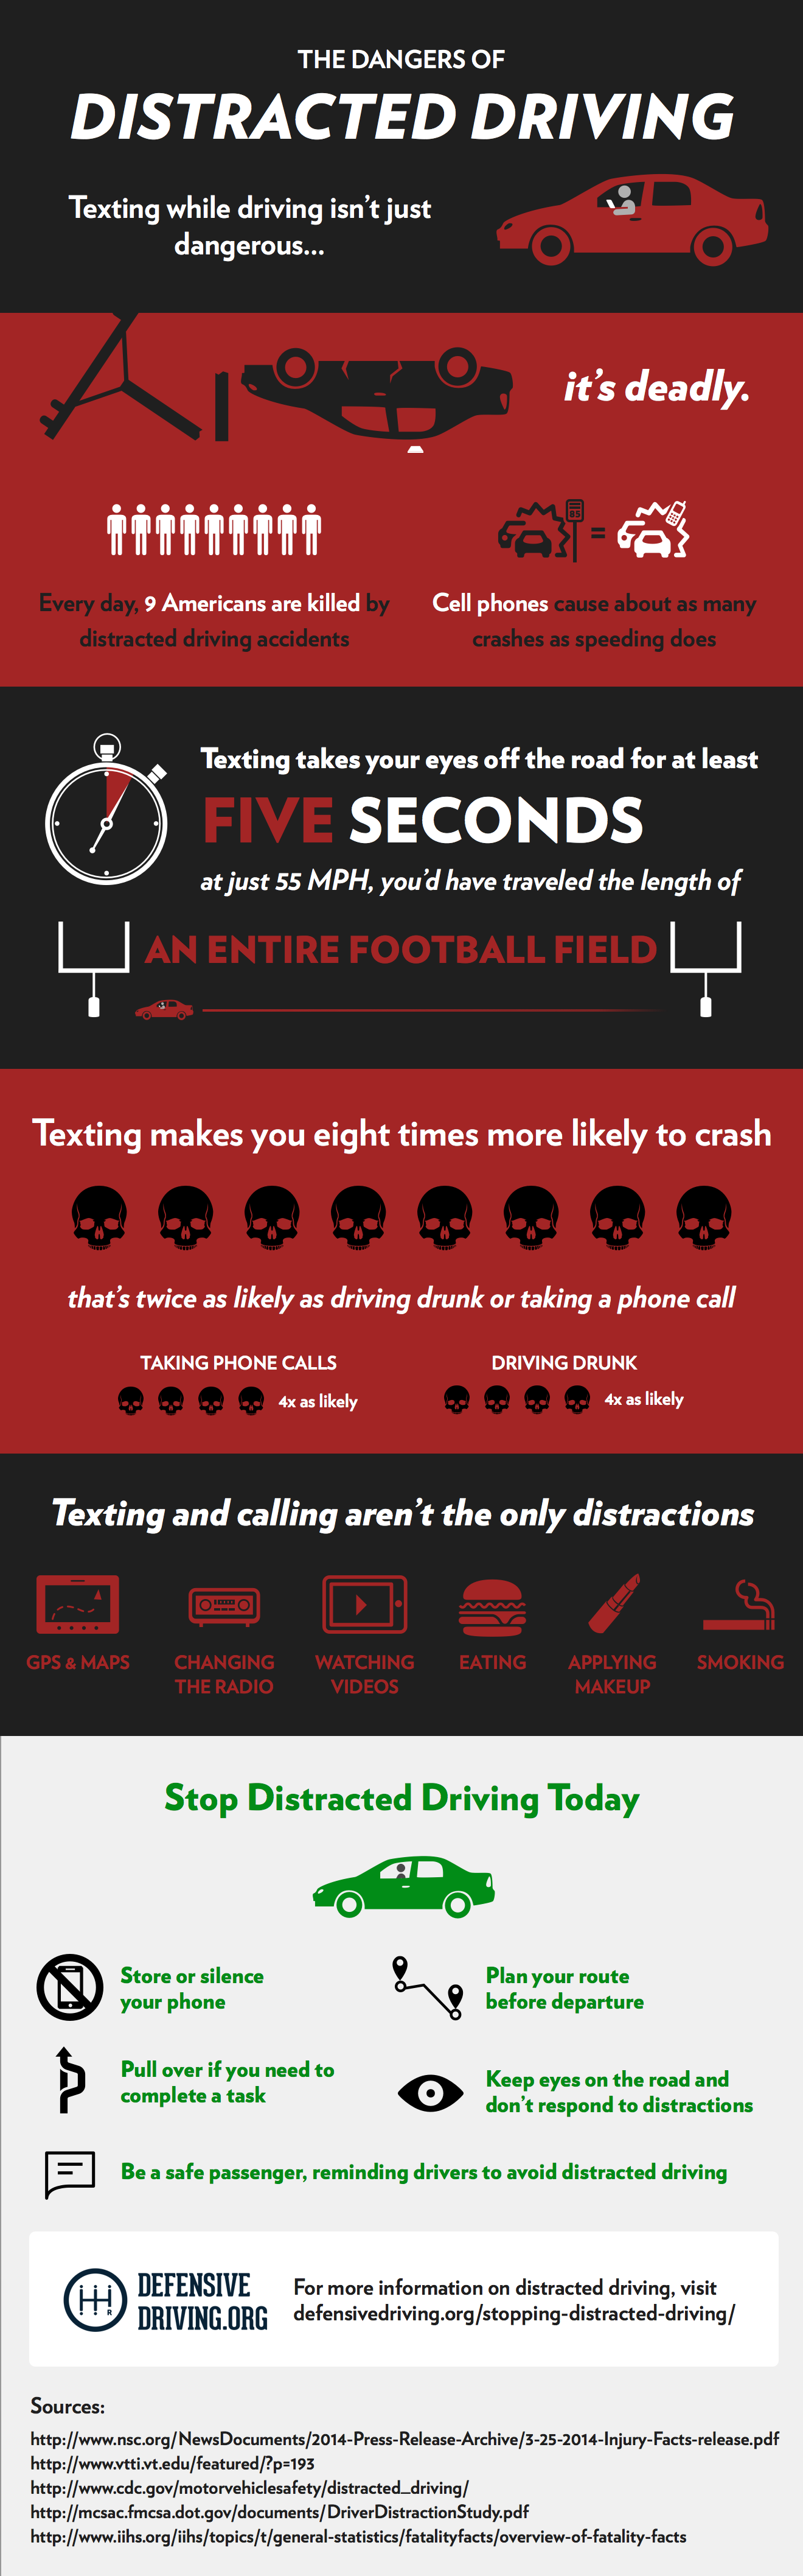 The Dangers of Distracted Driving infographic